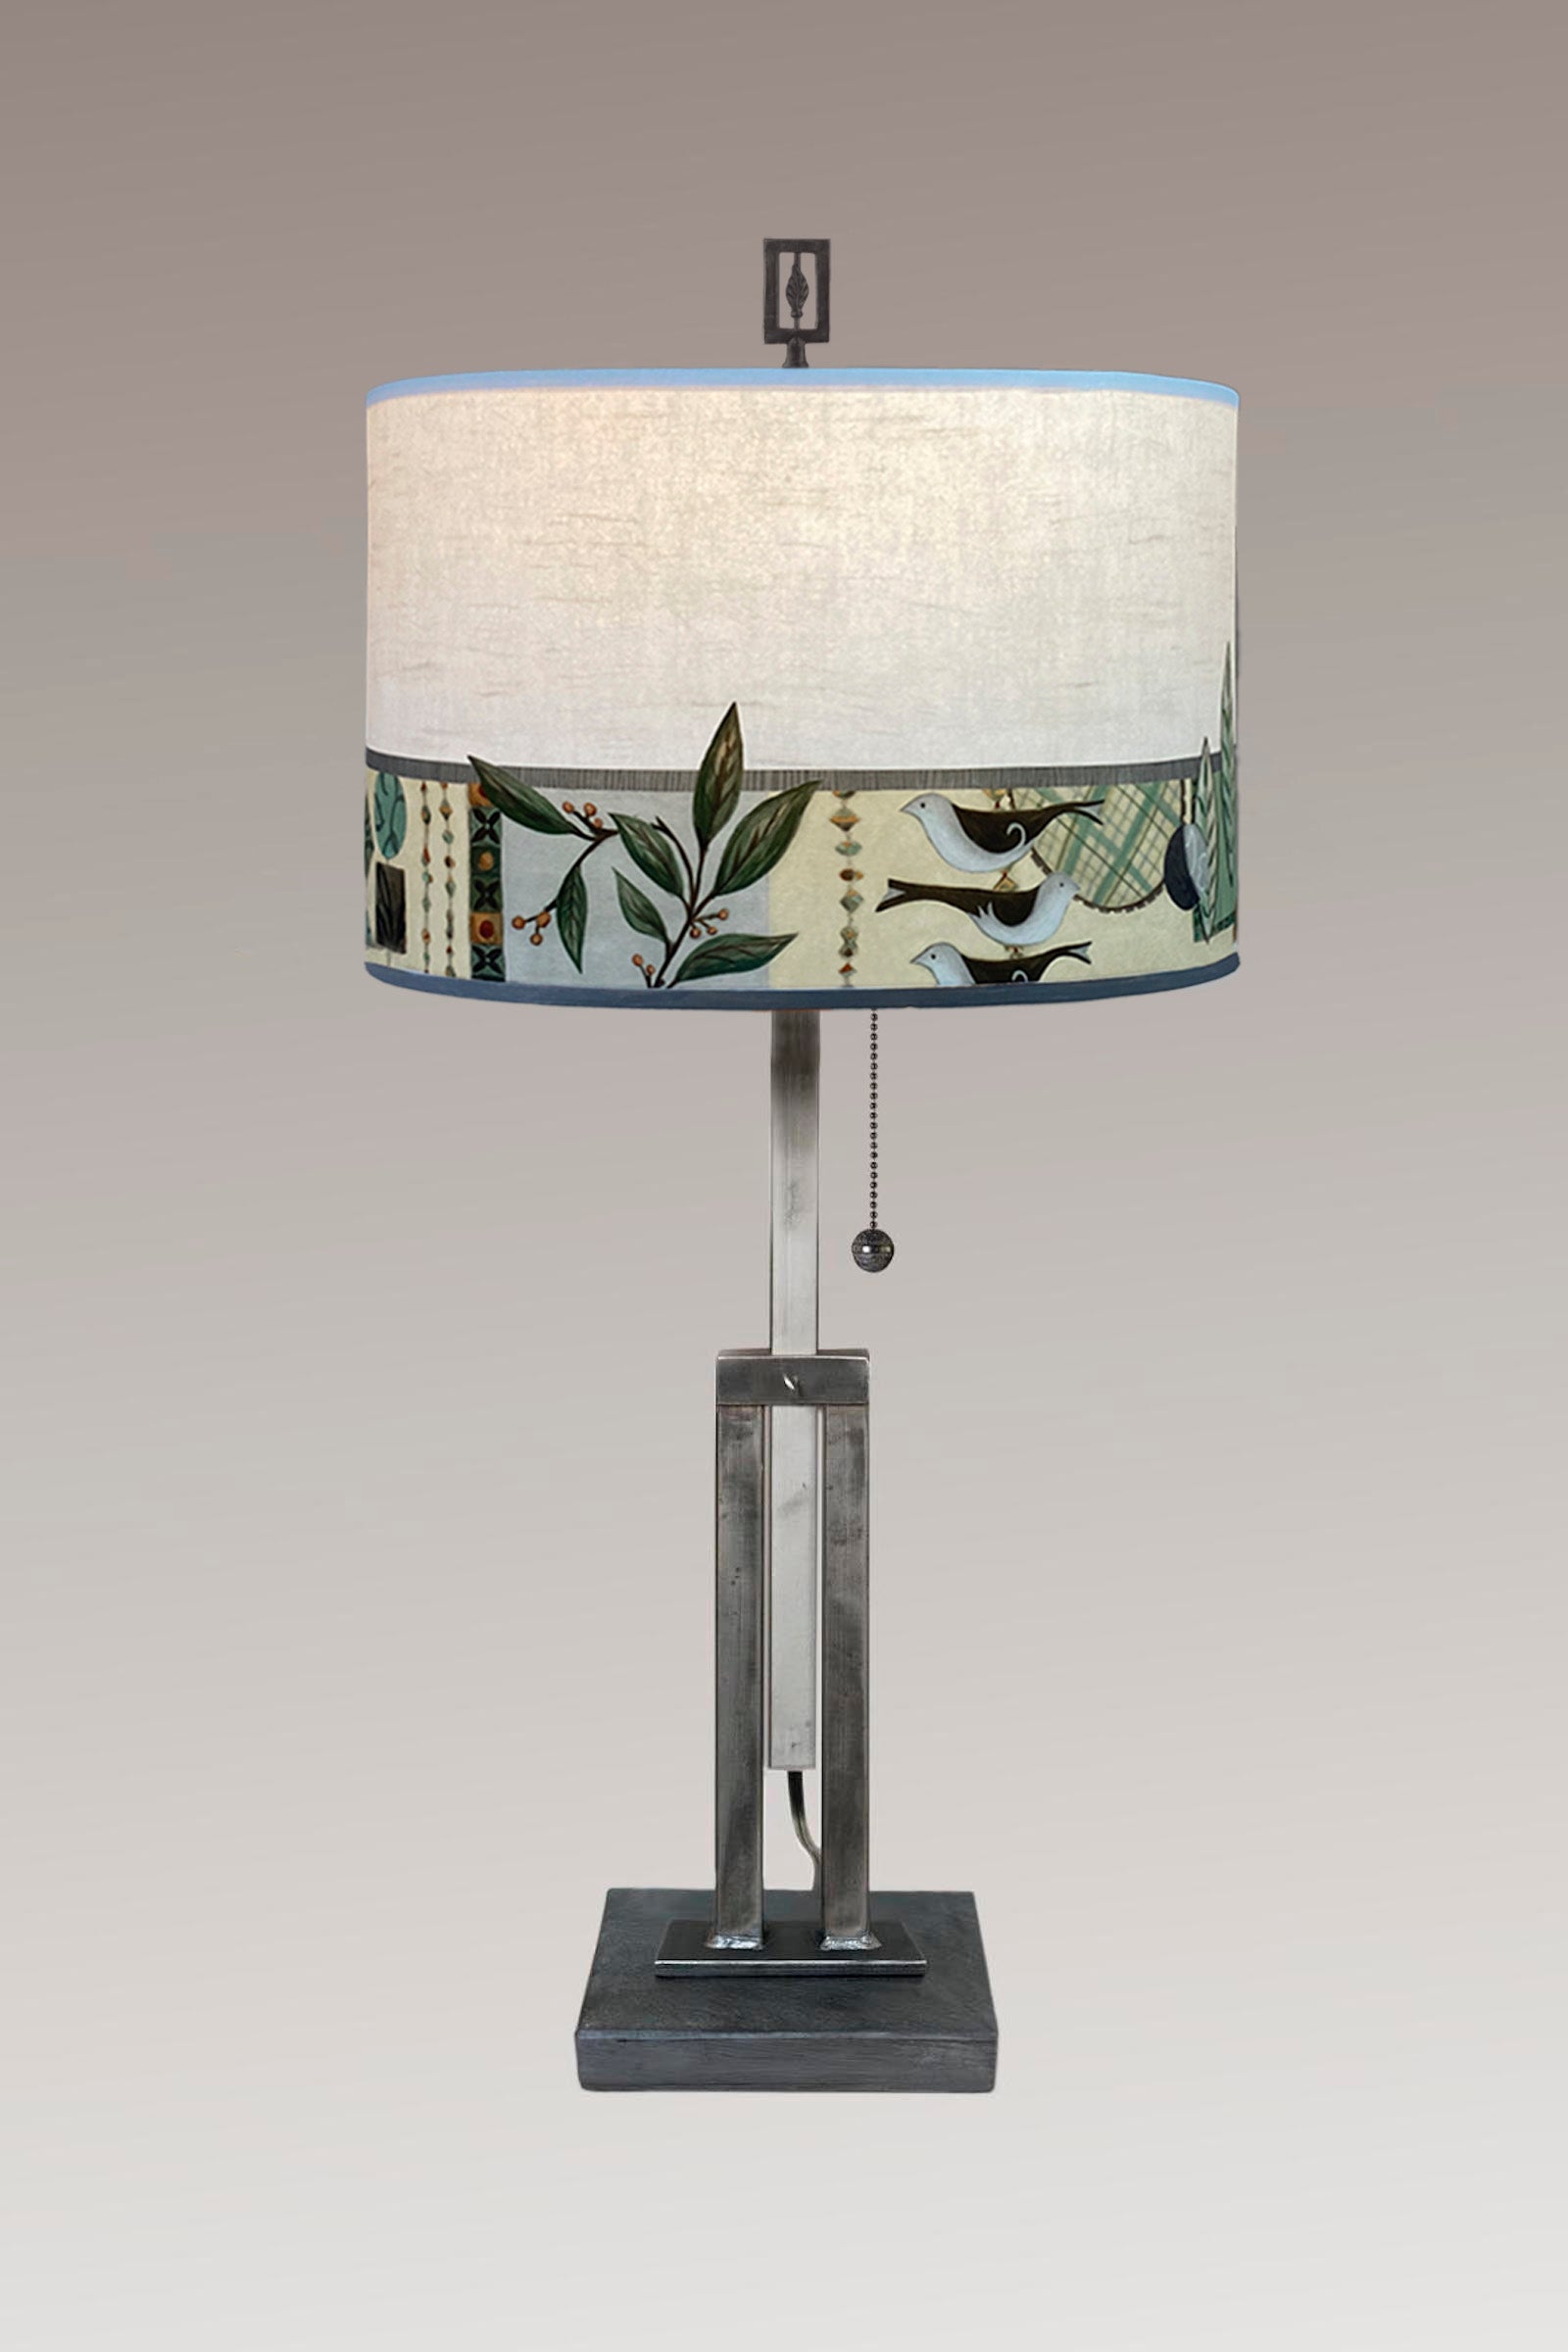 Janna Ugone & Co Table Lamp Adjustable-Height Steel Table Lamp with Large Drum Shade in New Capri Opal